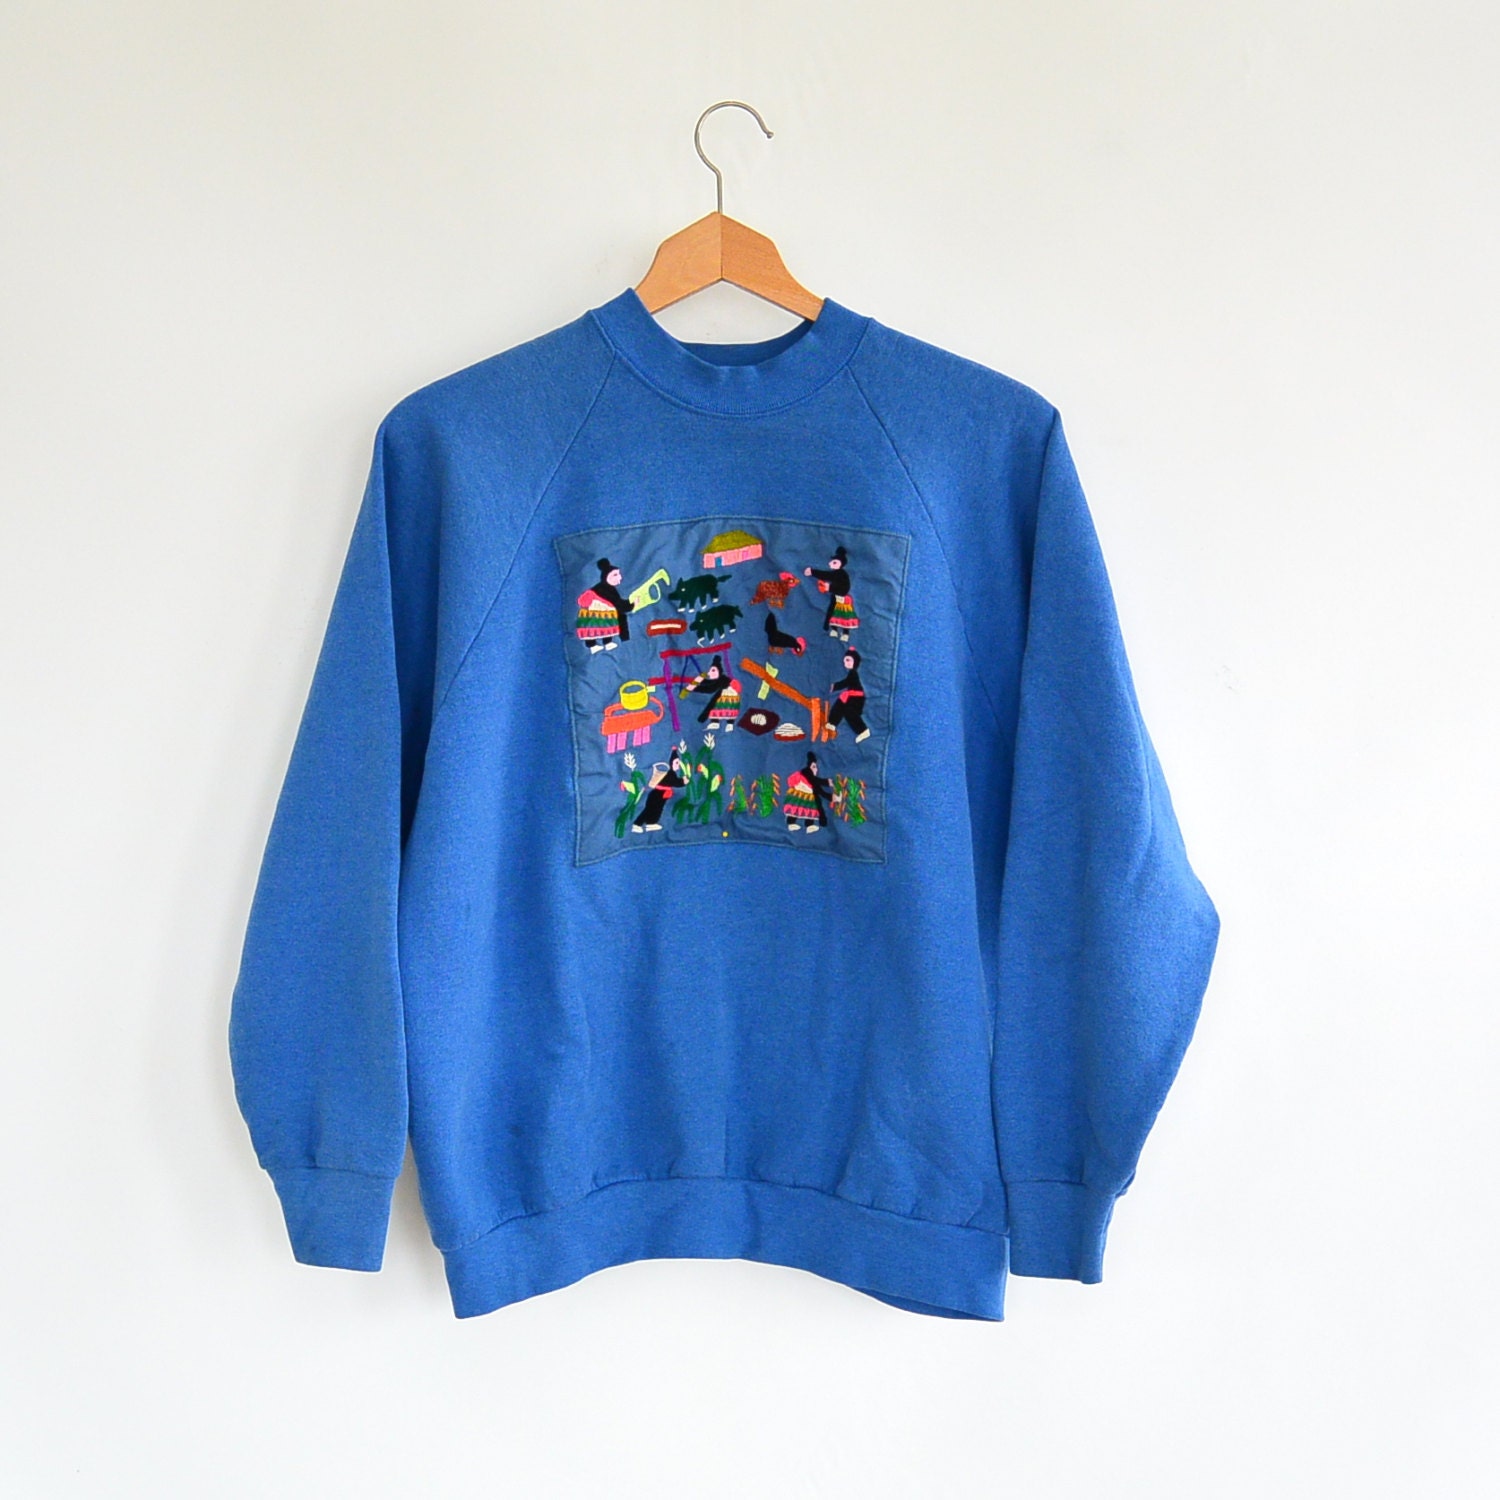 Vintage Embroidered Hmong Story Cloth Sweatshirt 1980's